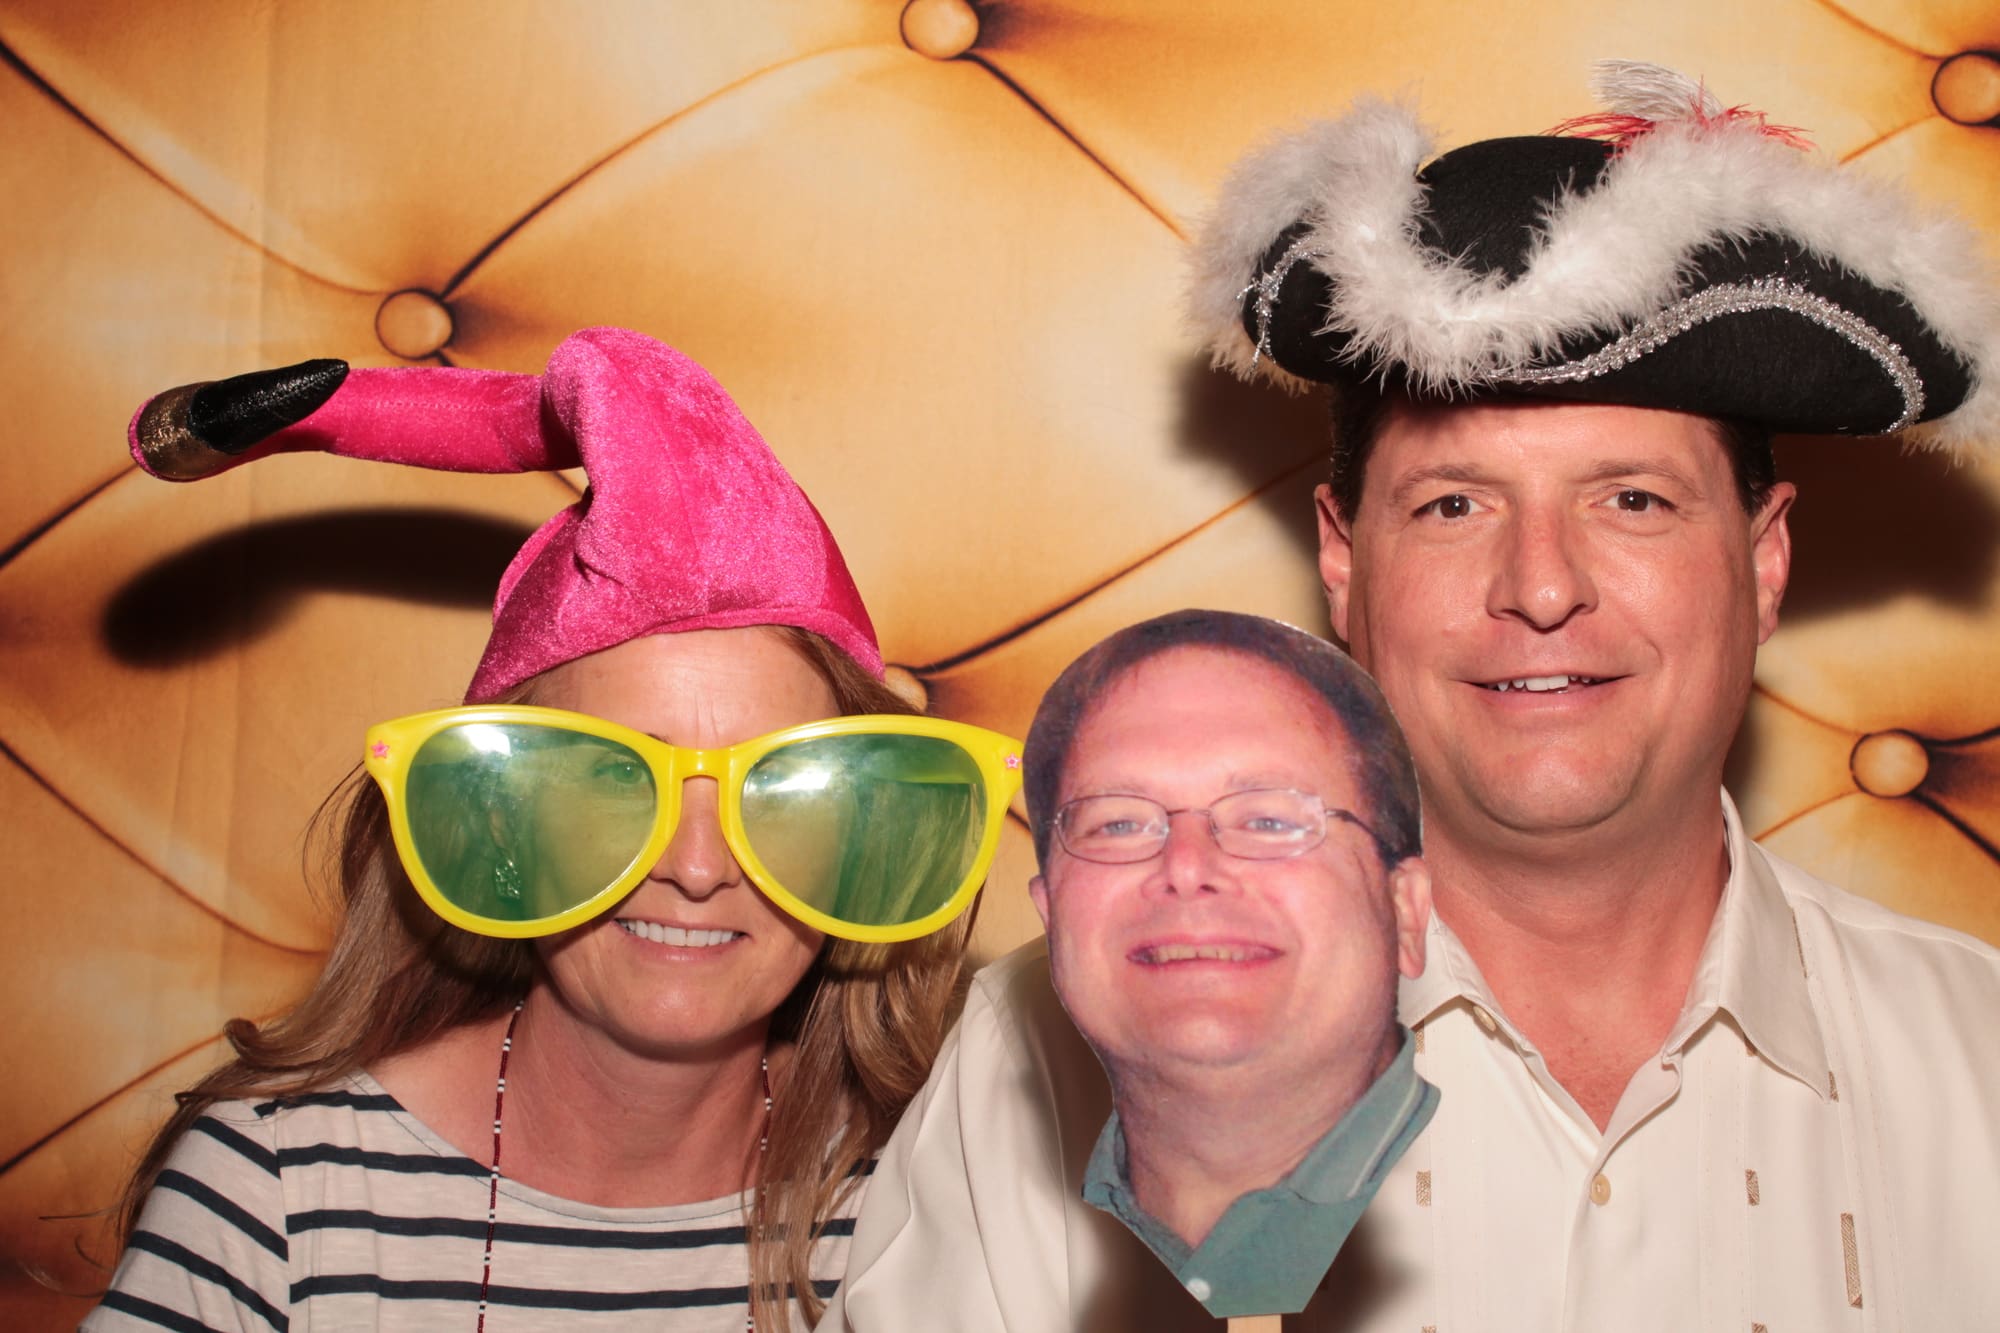 Photo Booth Rental-Retirement-Party-Austin-Driftwood-Thurmans Mansion-Memories-No. 1-Props-Assorted Backdrops-Roast